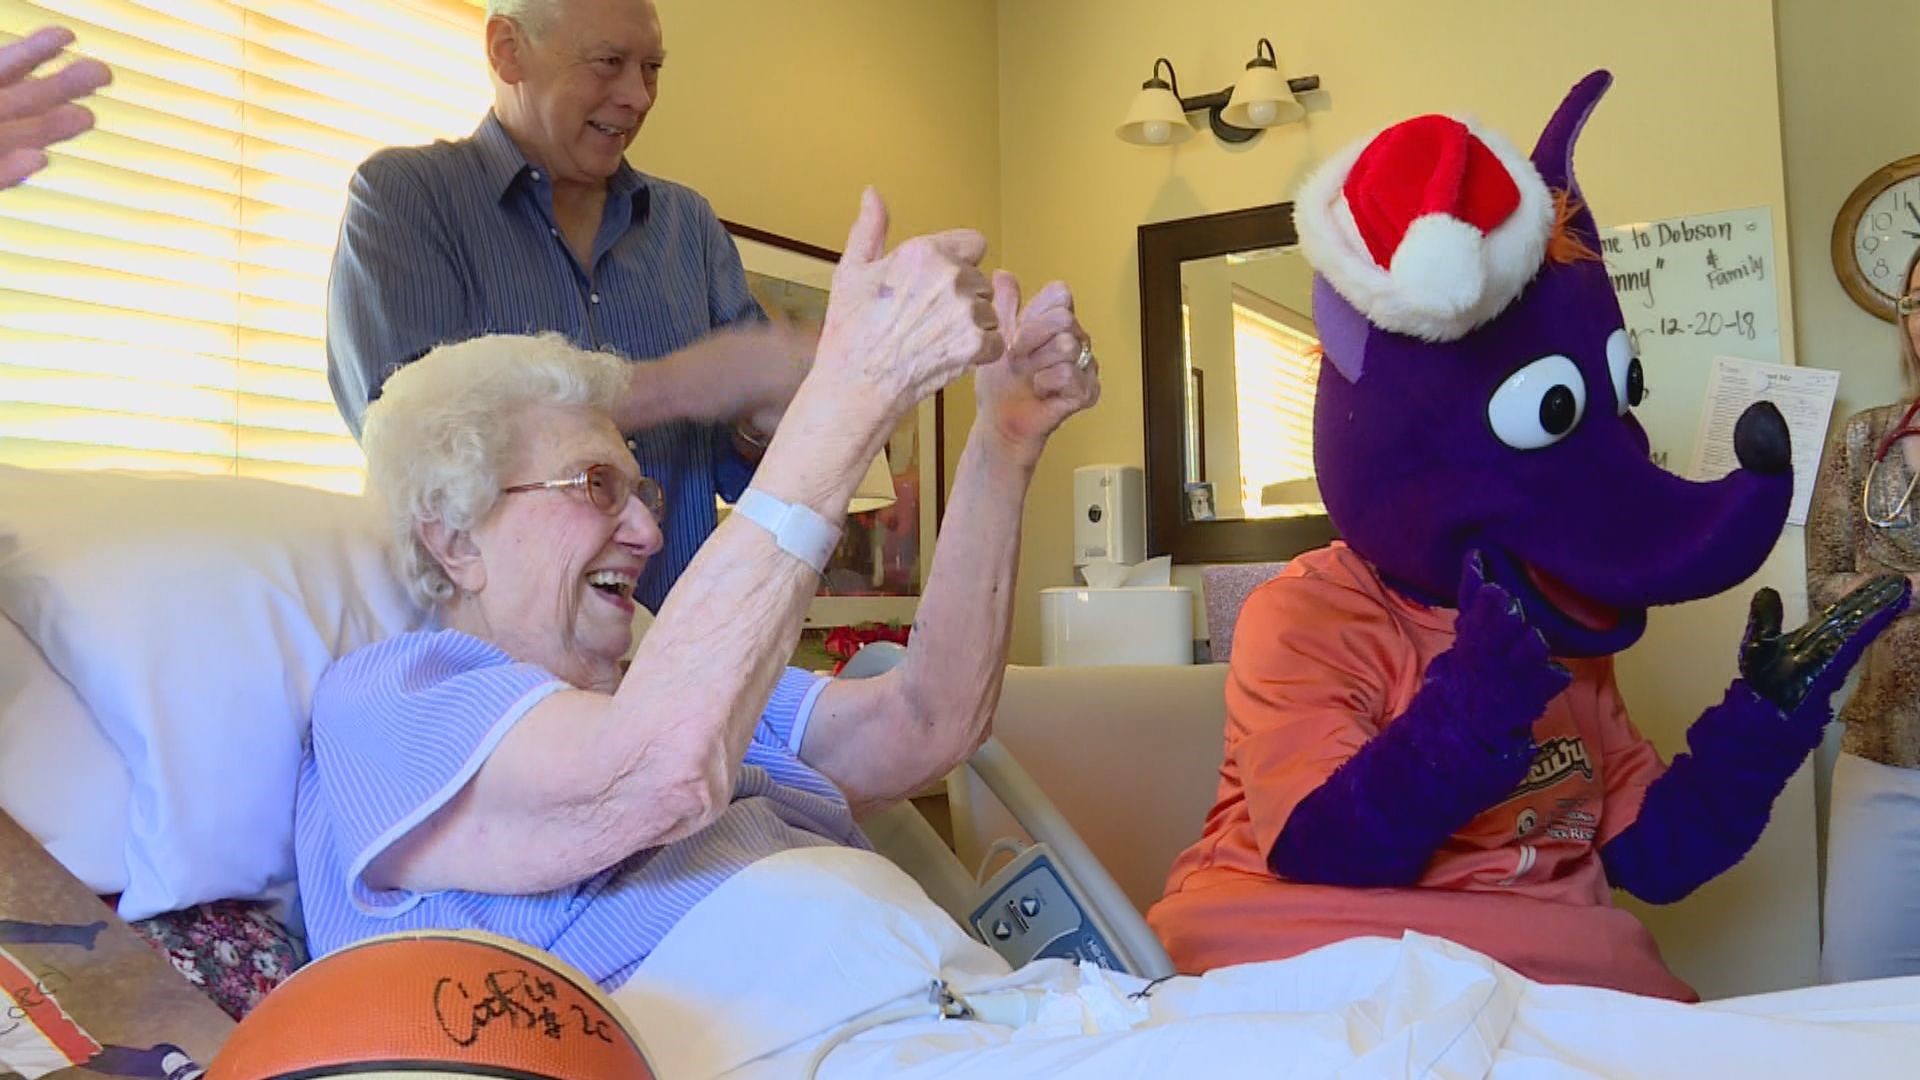 There were tears of joy for 95-year-old Phoenix Mercury fan Ginny Millar after receiving a special message from Diana Taurasi.